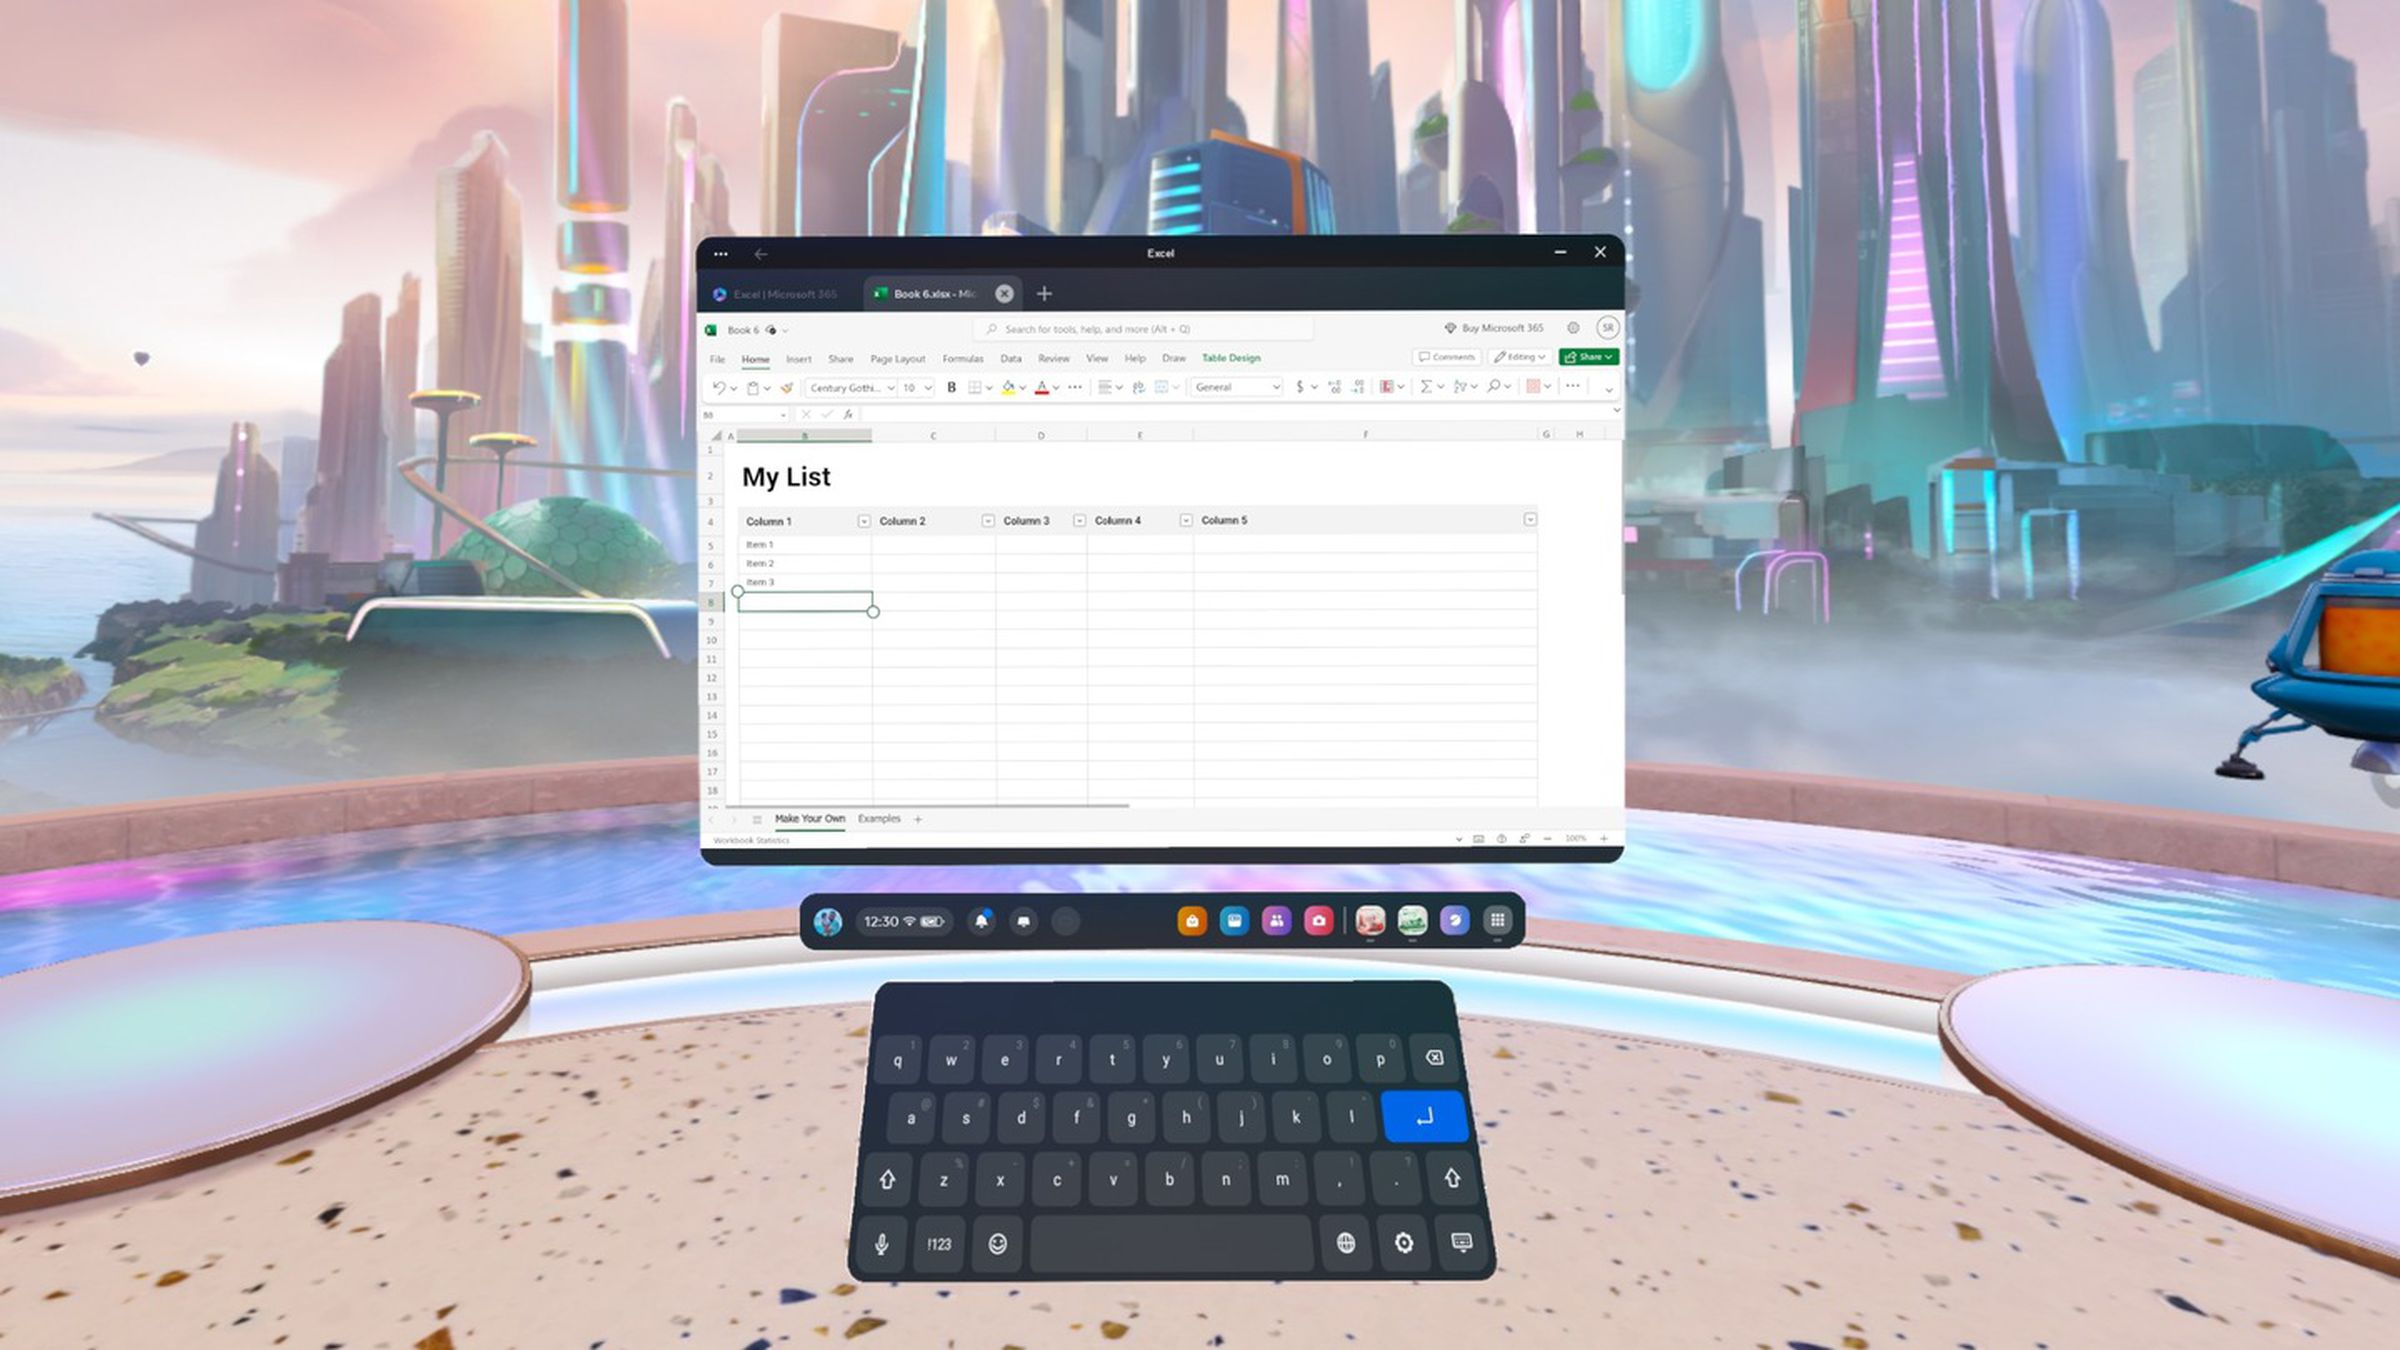 A screenshot of Microsoft Excel in VR on a Quest headset.